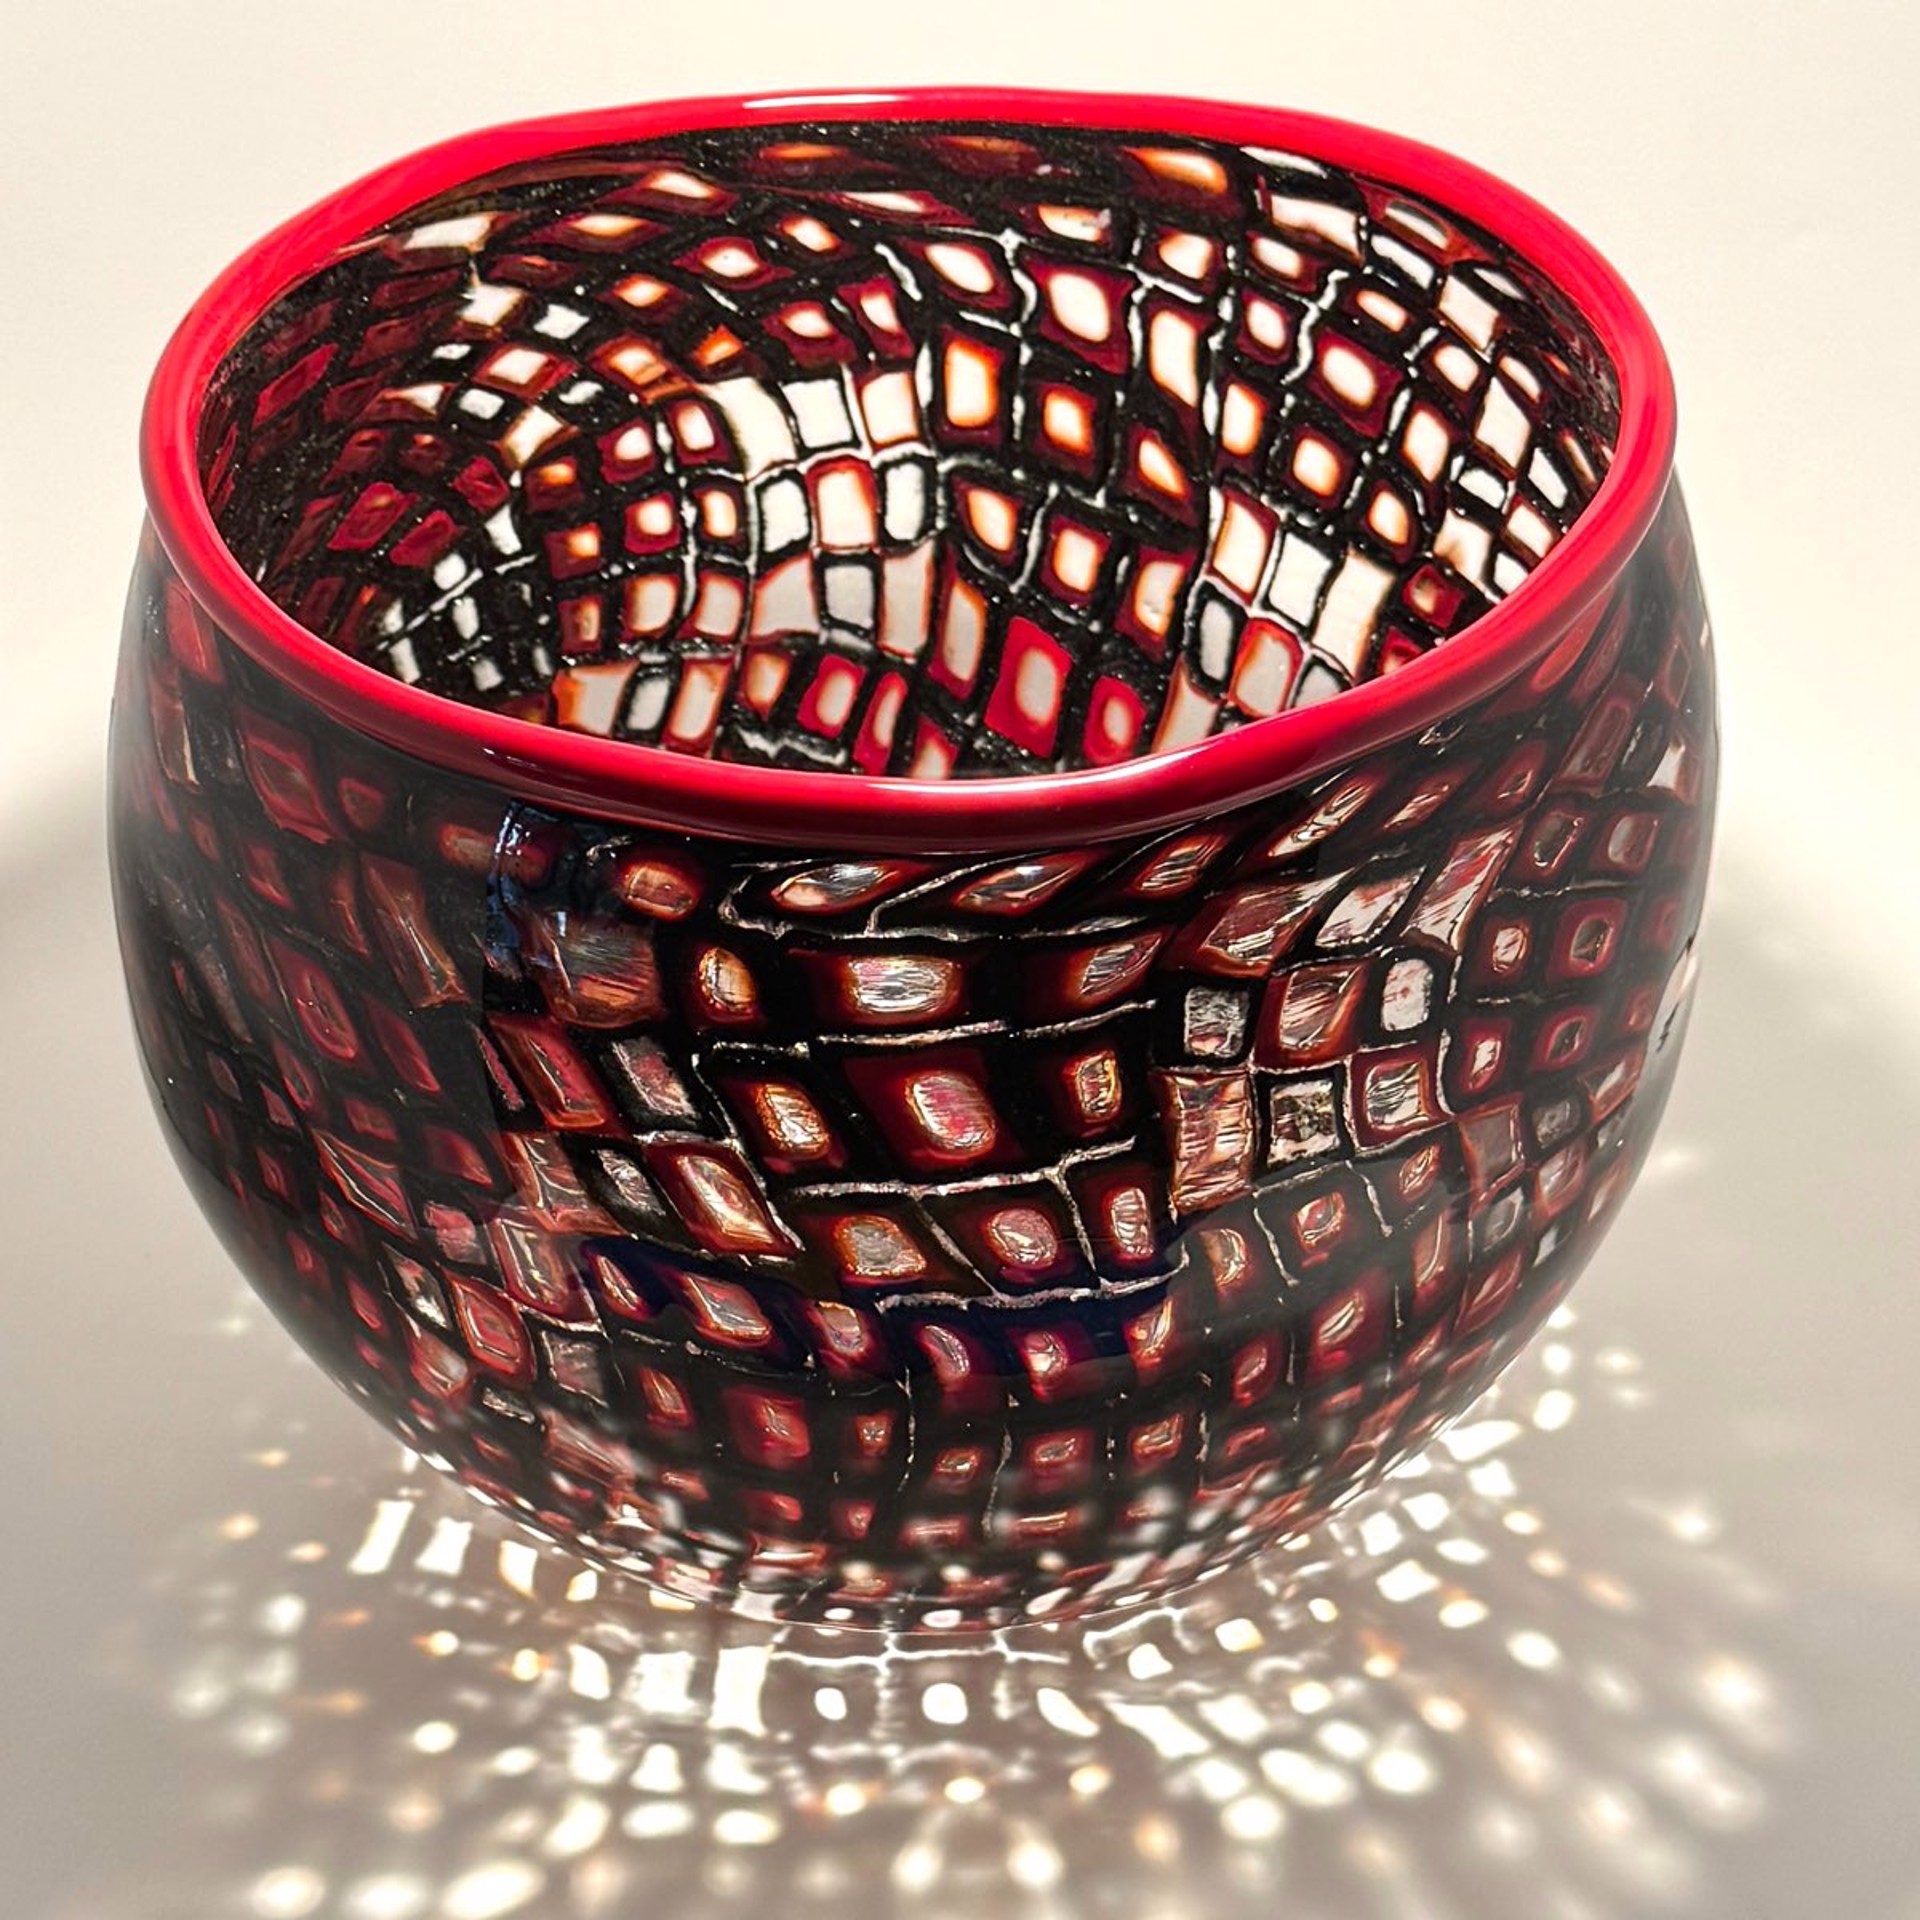 Black and Red Squares Bowl JG23-4 by John Glass